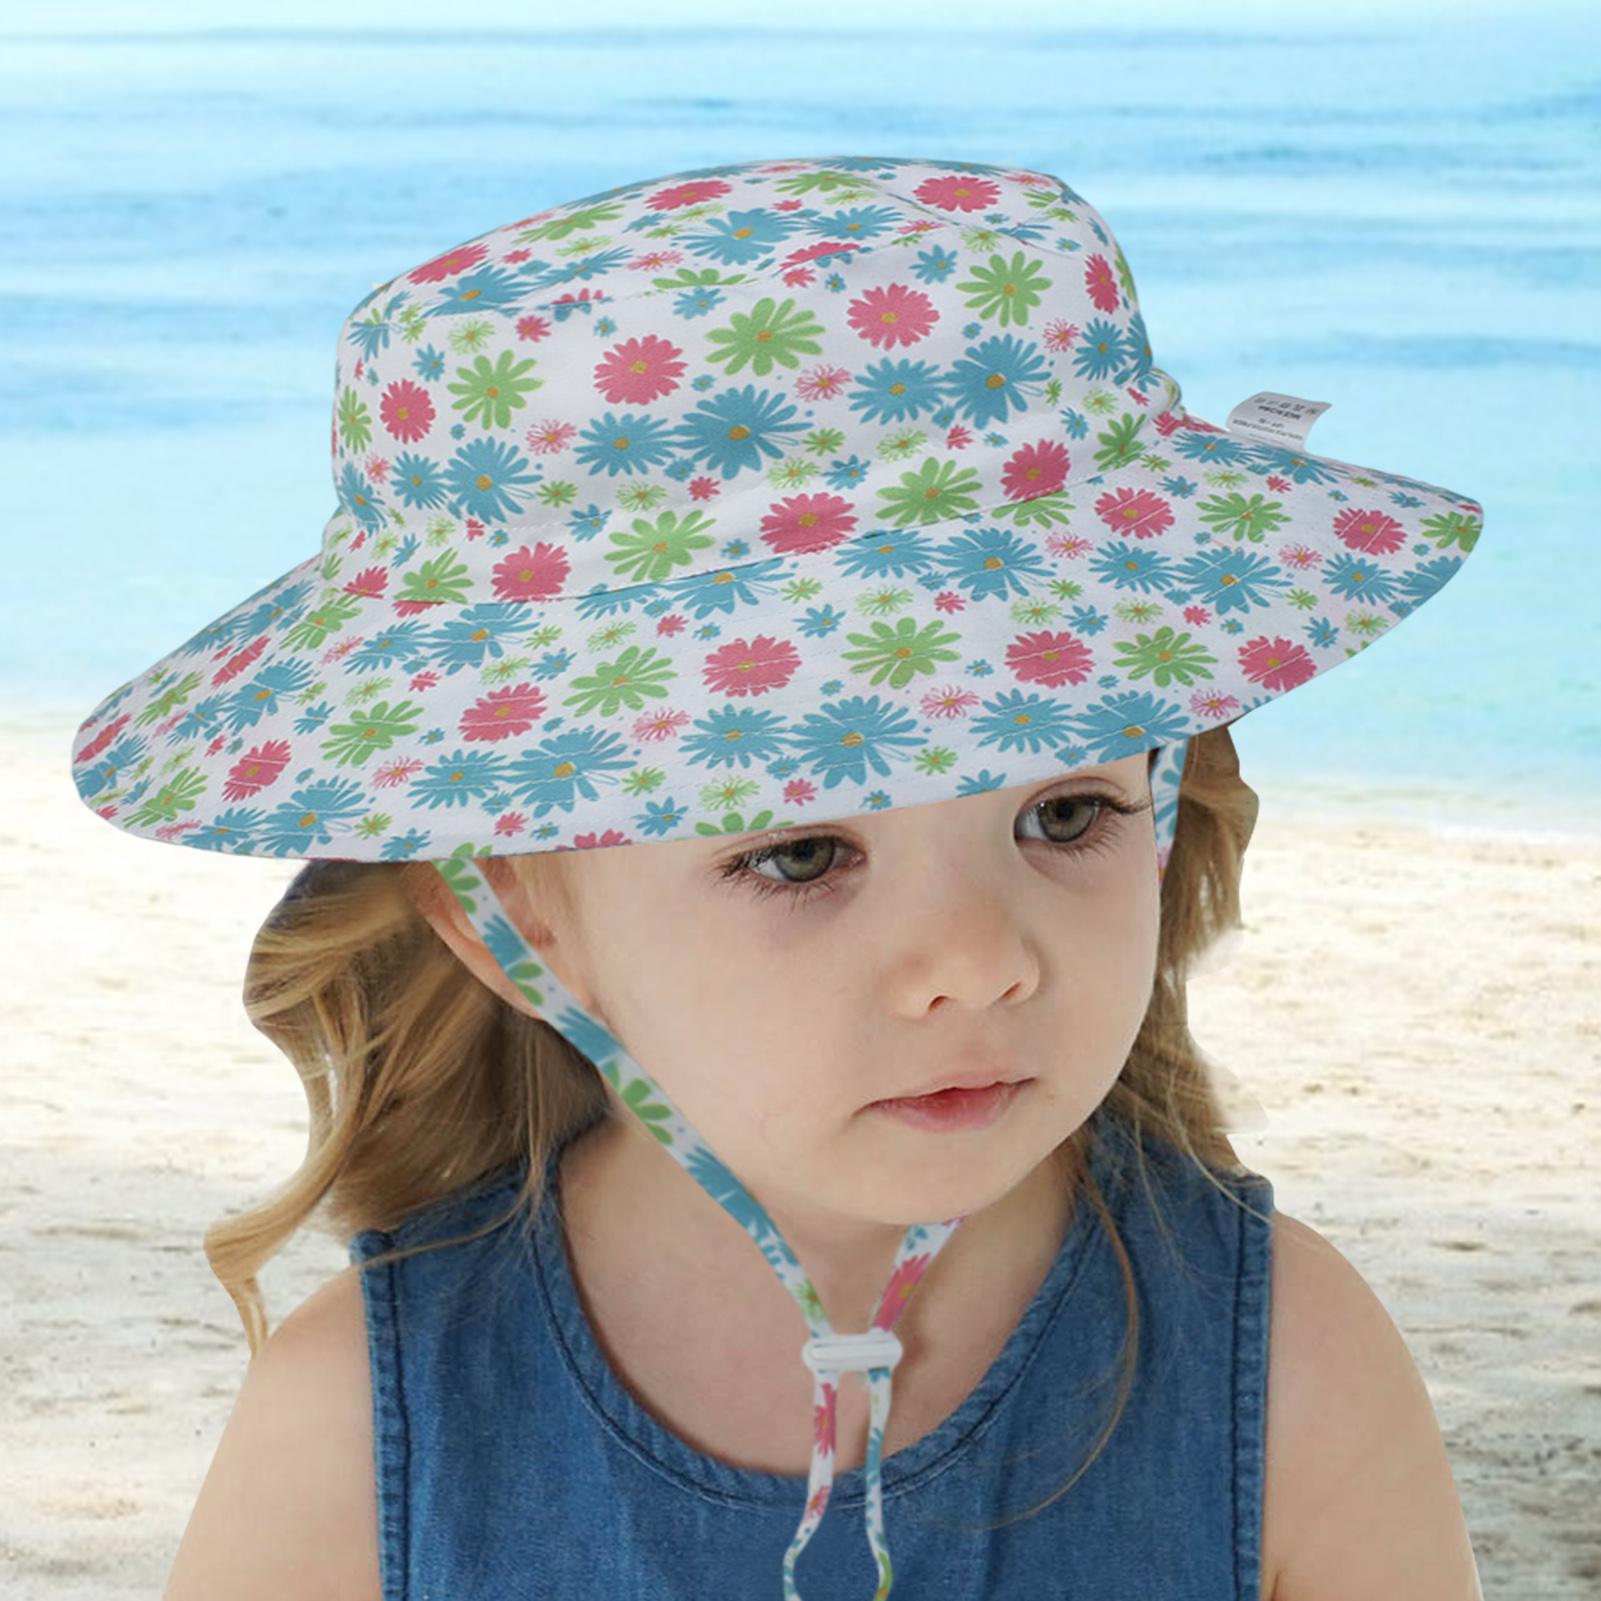 YMYDYFC Baby Girl Sun Hat Summer Beach Hats with UPF 50 Toddler Infant with Wide Brim Strap Outdoor Bucket Hat